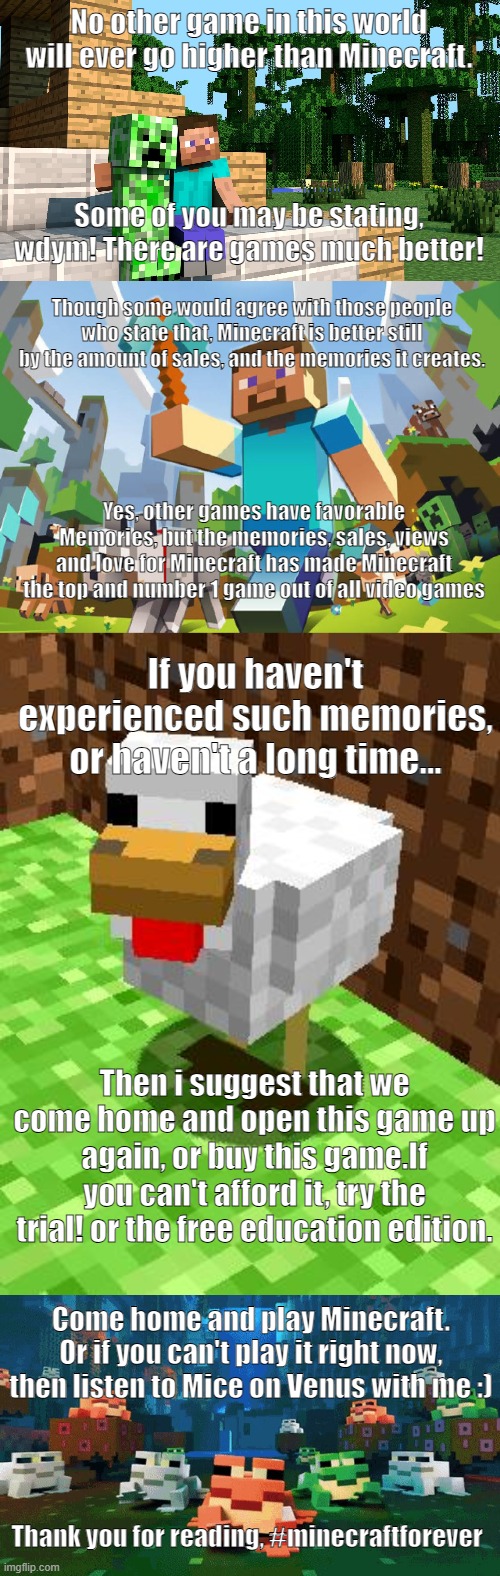 Minecraft NUMBER 1 | No other game in this world will ever go higher than Minecraft. Some of you may be stating, wdym! There are games much better! Though some would agree with those people who state that, Minecraft is better still by the amount of sales, and the memories it creates. Yes, other games have favorable Memories, but the memories, sales, views and love for Minecraft has made Minecraft the top and number 1 game out of all video games; If you haven't experienced such memories, or haven't a long time... Then i suggest that we come home and open this game up again, or buy this game.If you can't afford it, try the trial! or the free education edition. Come home and play Minecraft. Or if you can't play it right now, then listen to Mice on Venus with me :); Thank you for reading, #minecraftforever | image tagged in minecraft,minecraft advice chicken,happy frogs | made w/ Imgflip meme maker